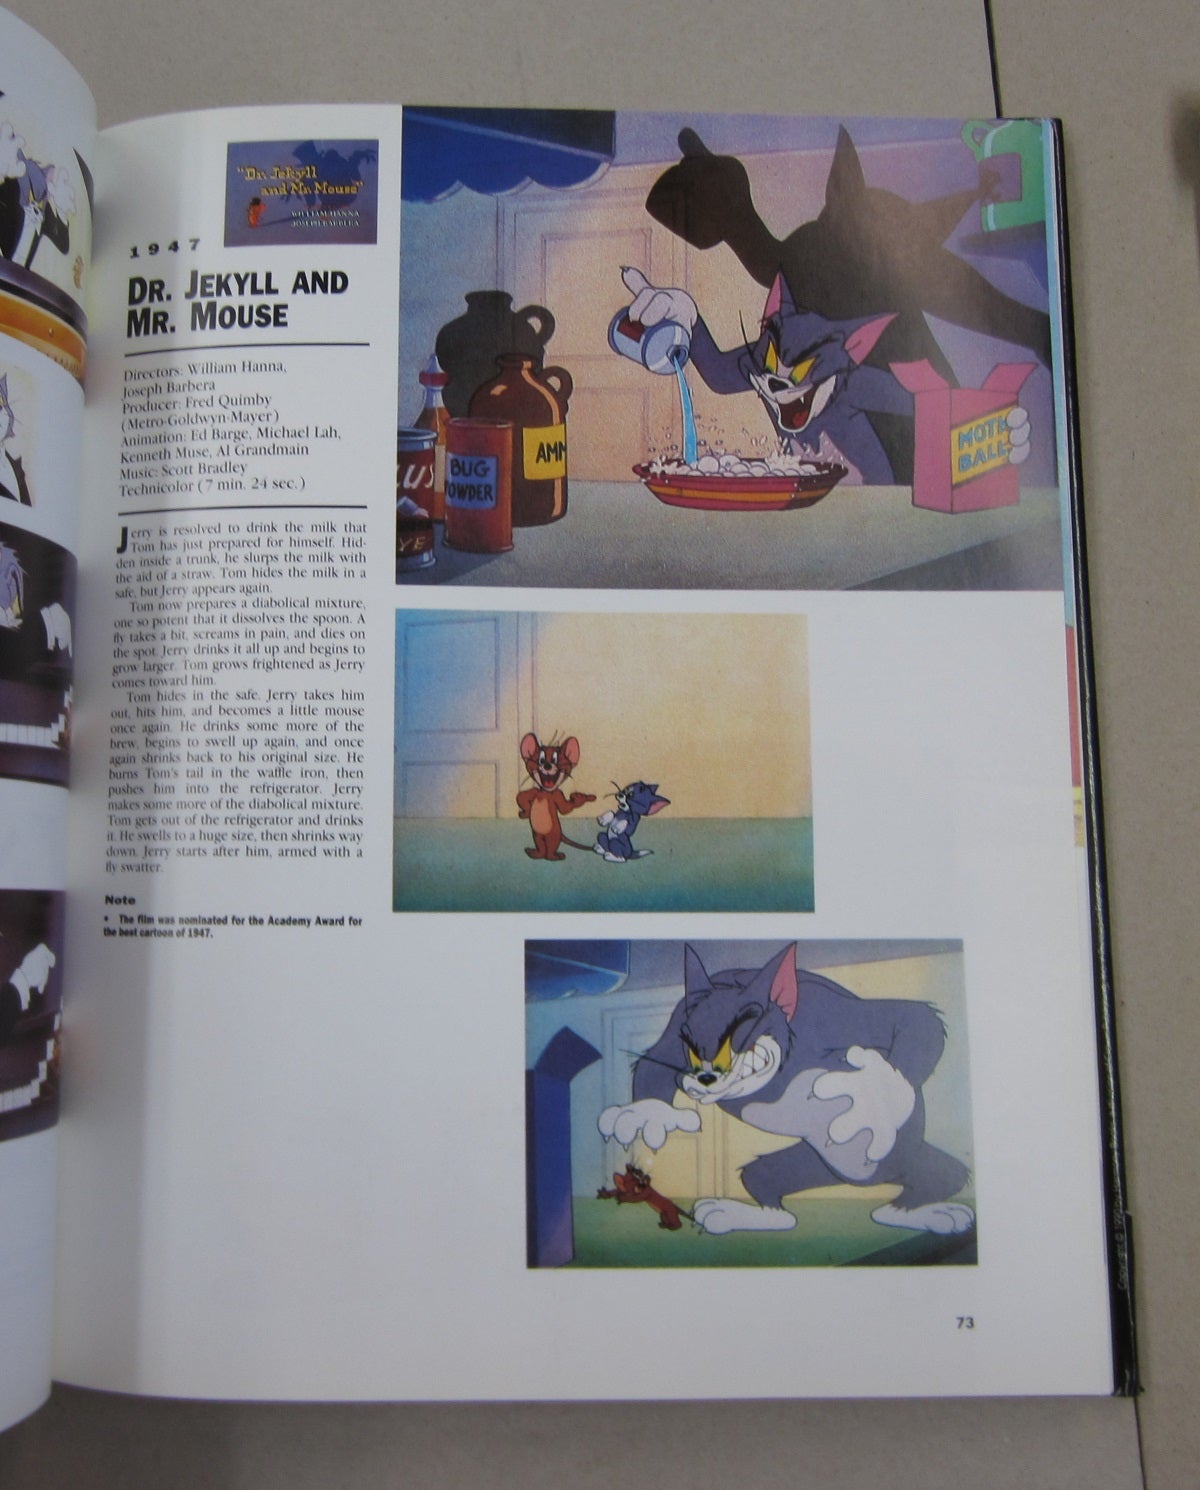 Tom and Jerry: The Definitive Guide to Their Animated Adventures